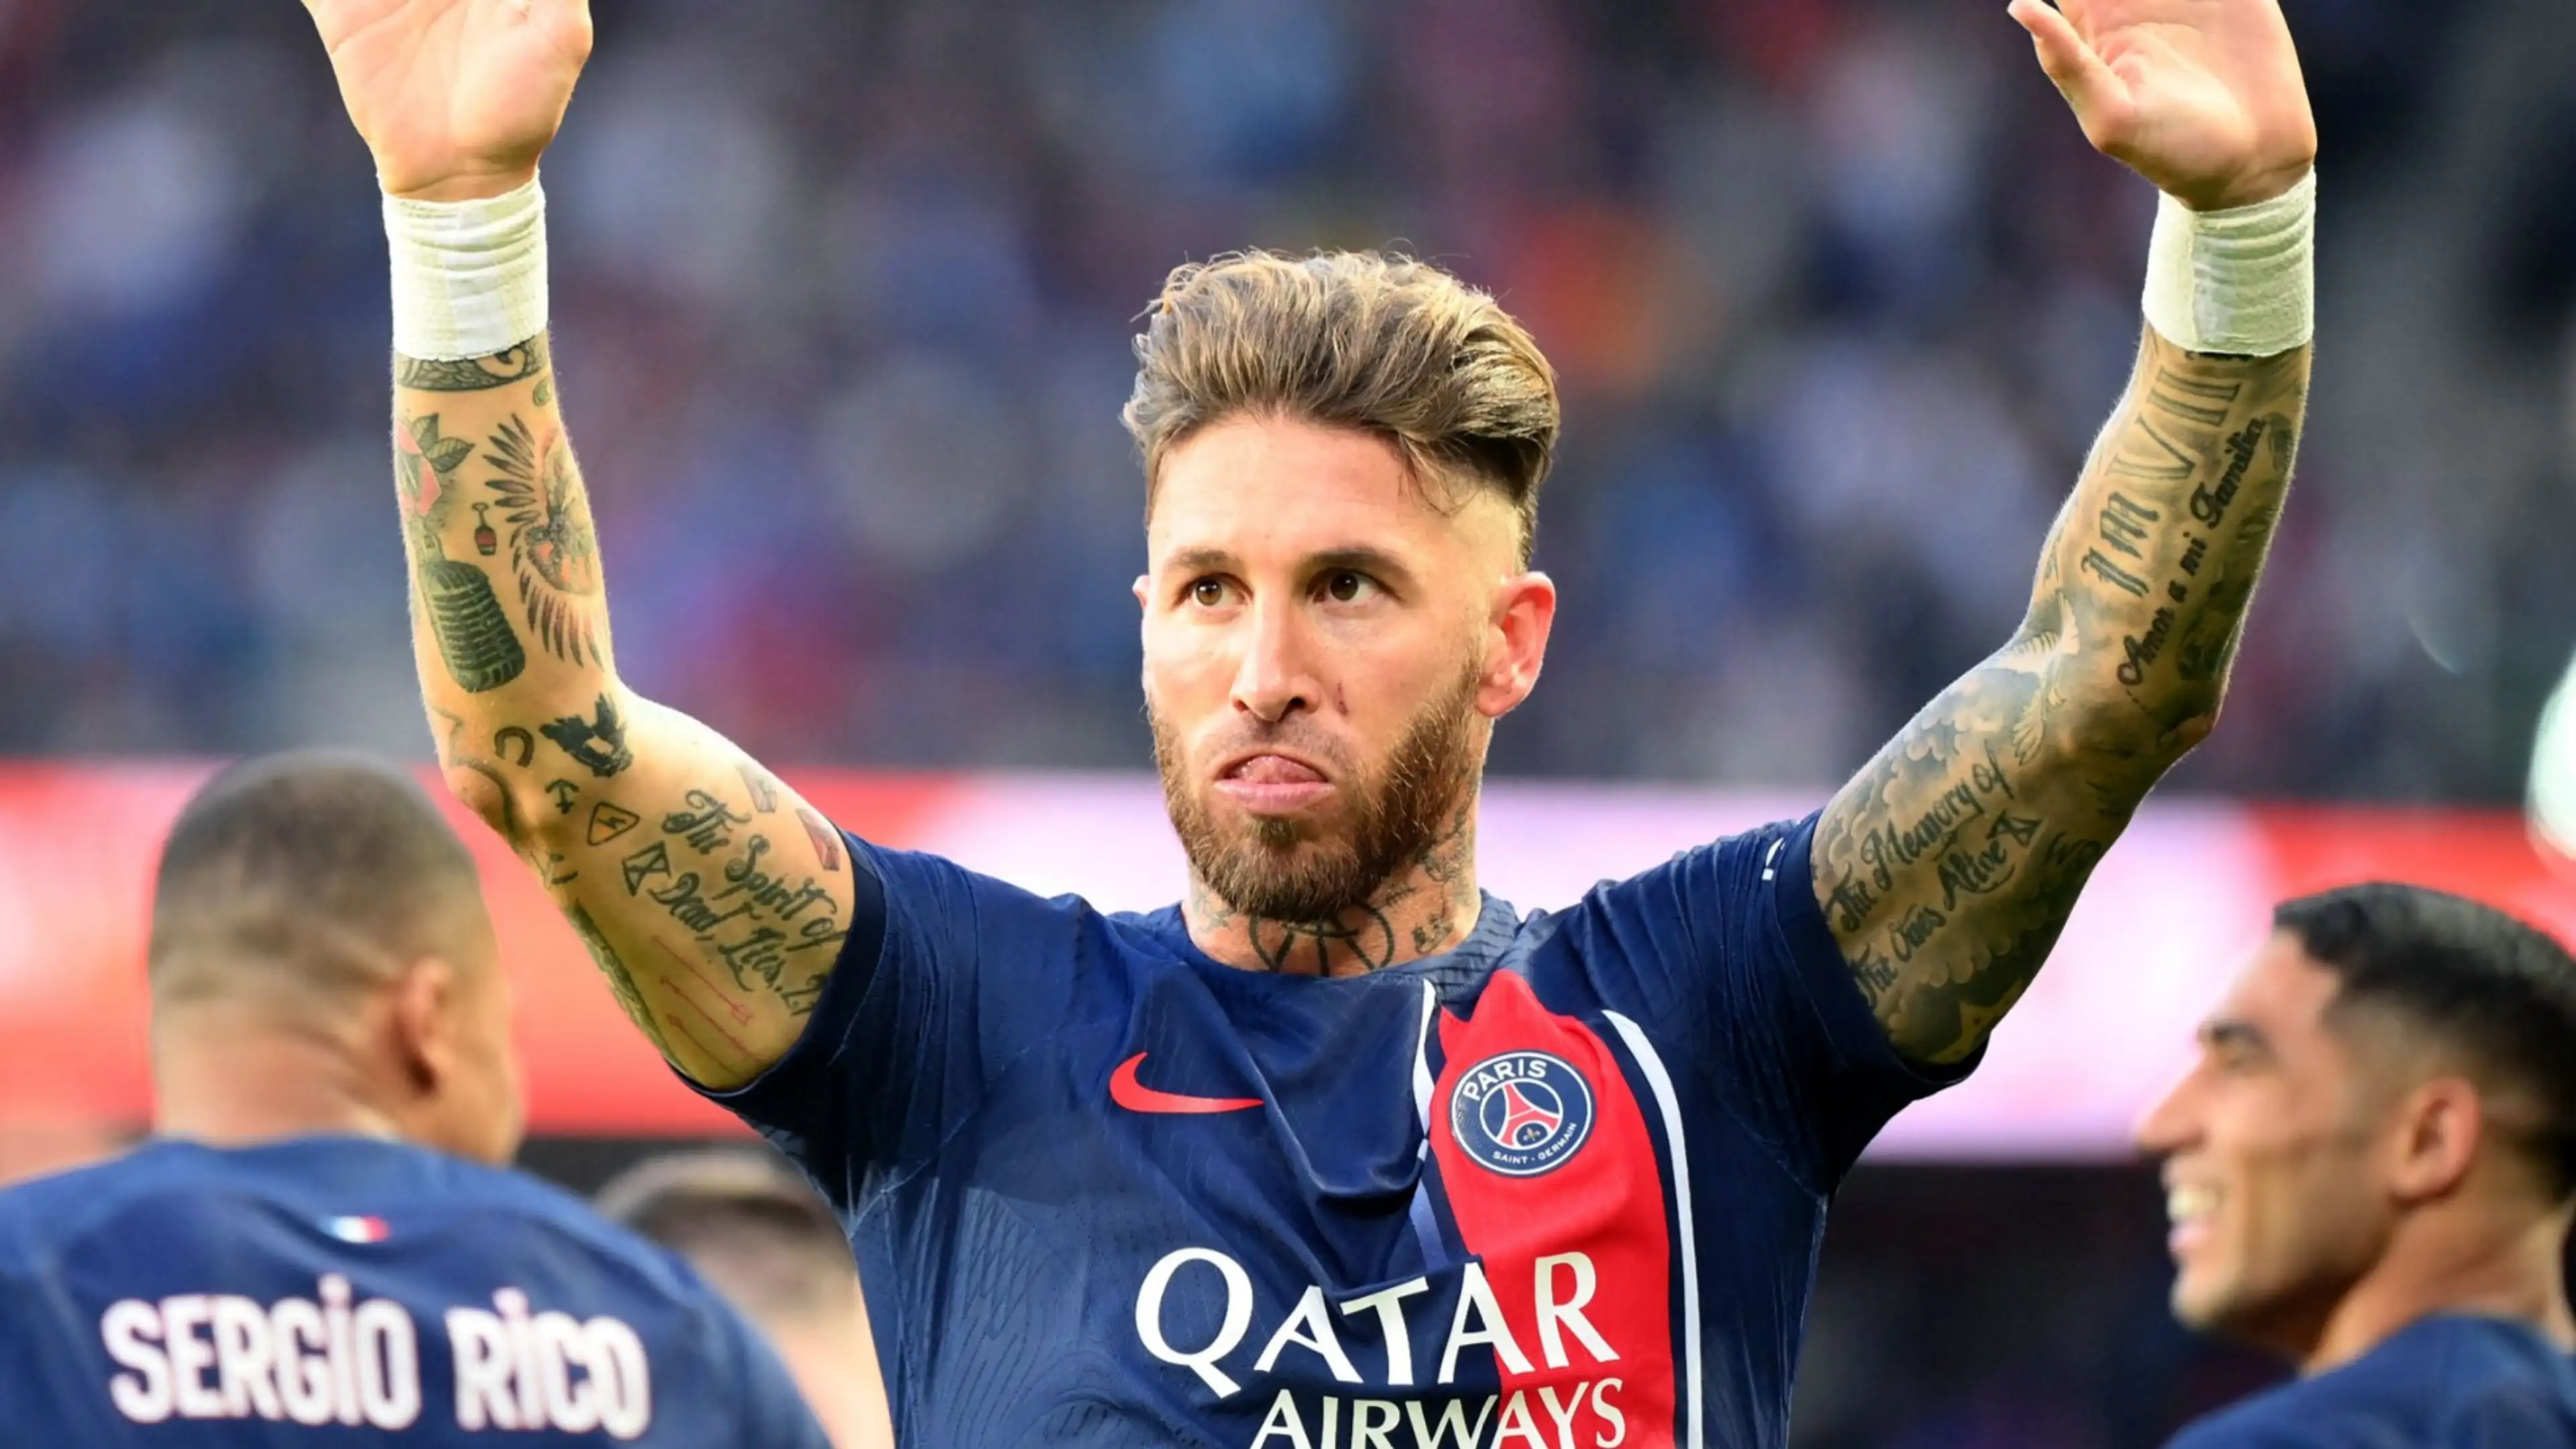 Former Real Madrid Defender Ramos May Become Los Angeles Player